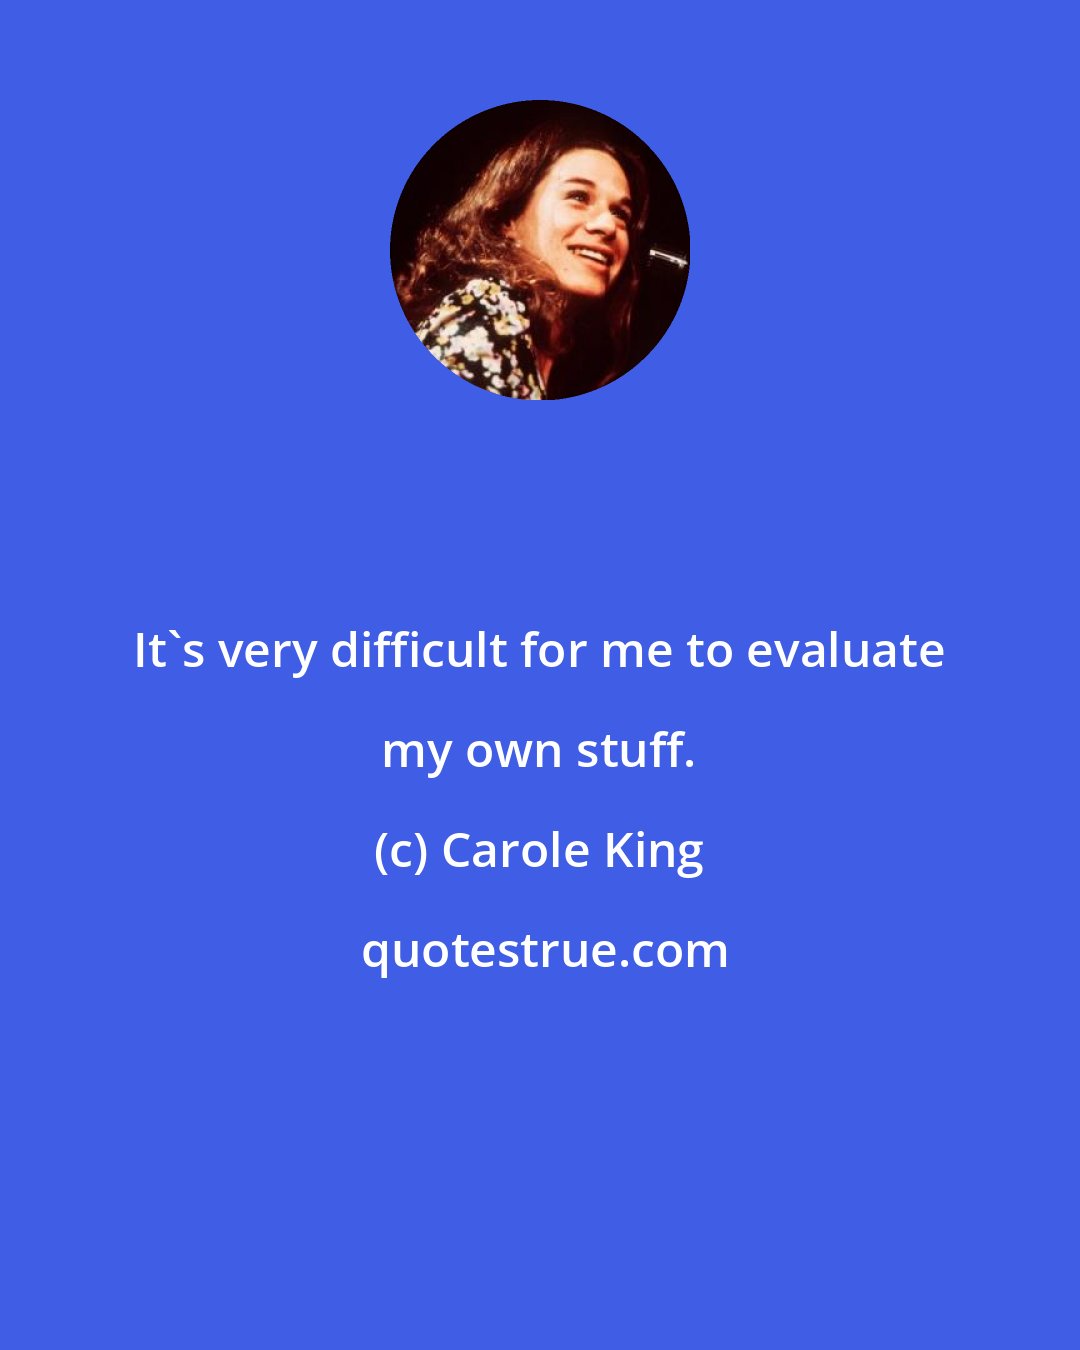 Carole King: It's very difficult for me to evaluate my own stuff.